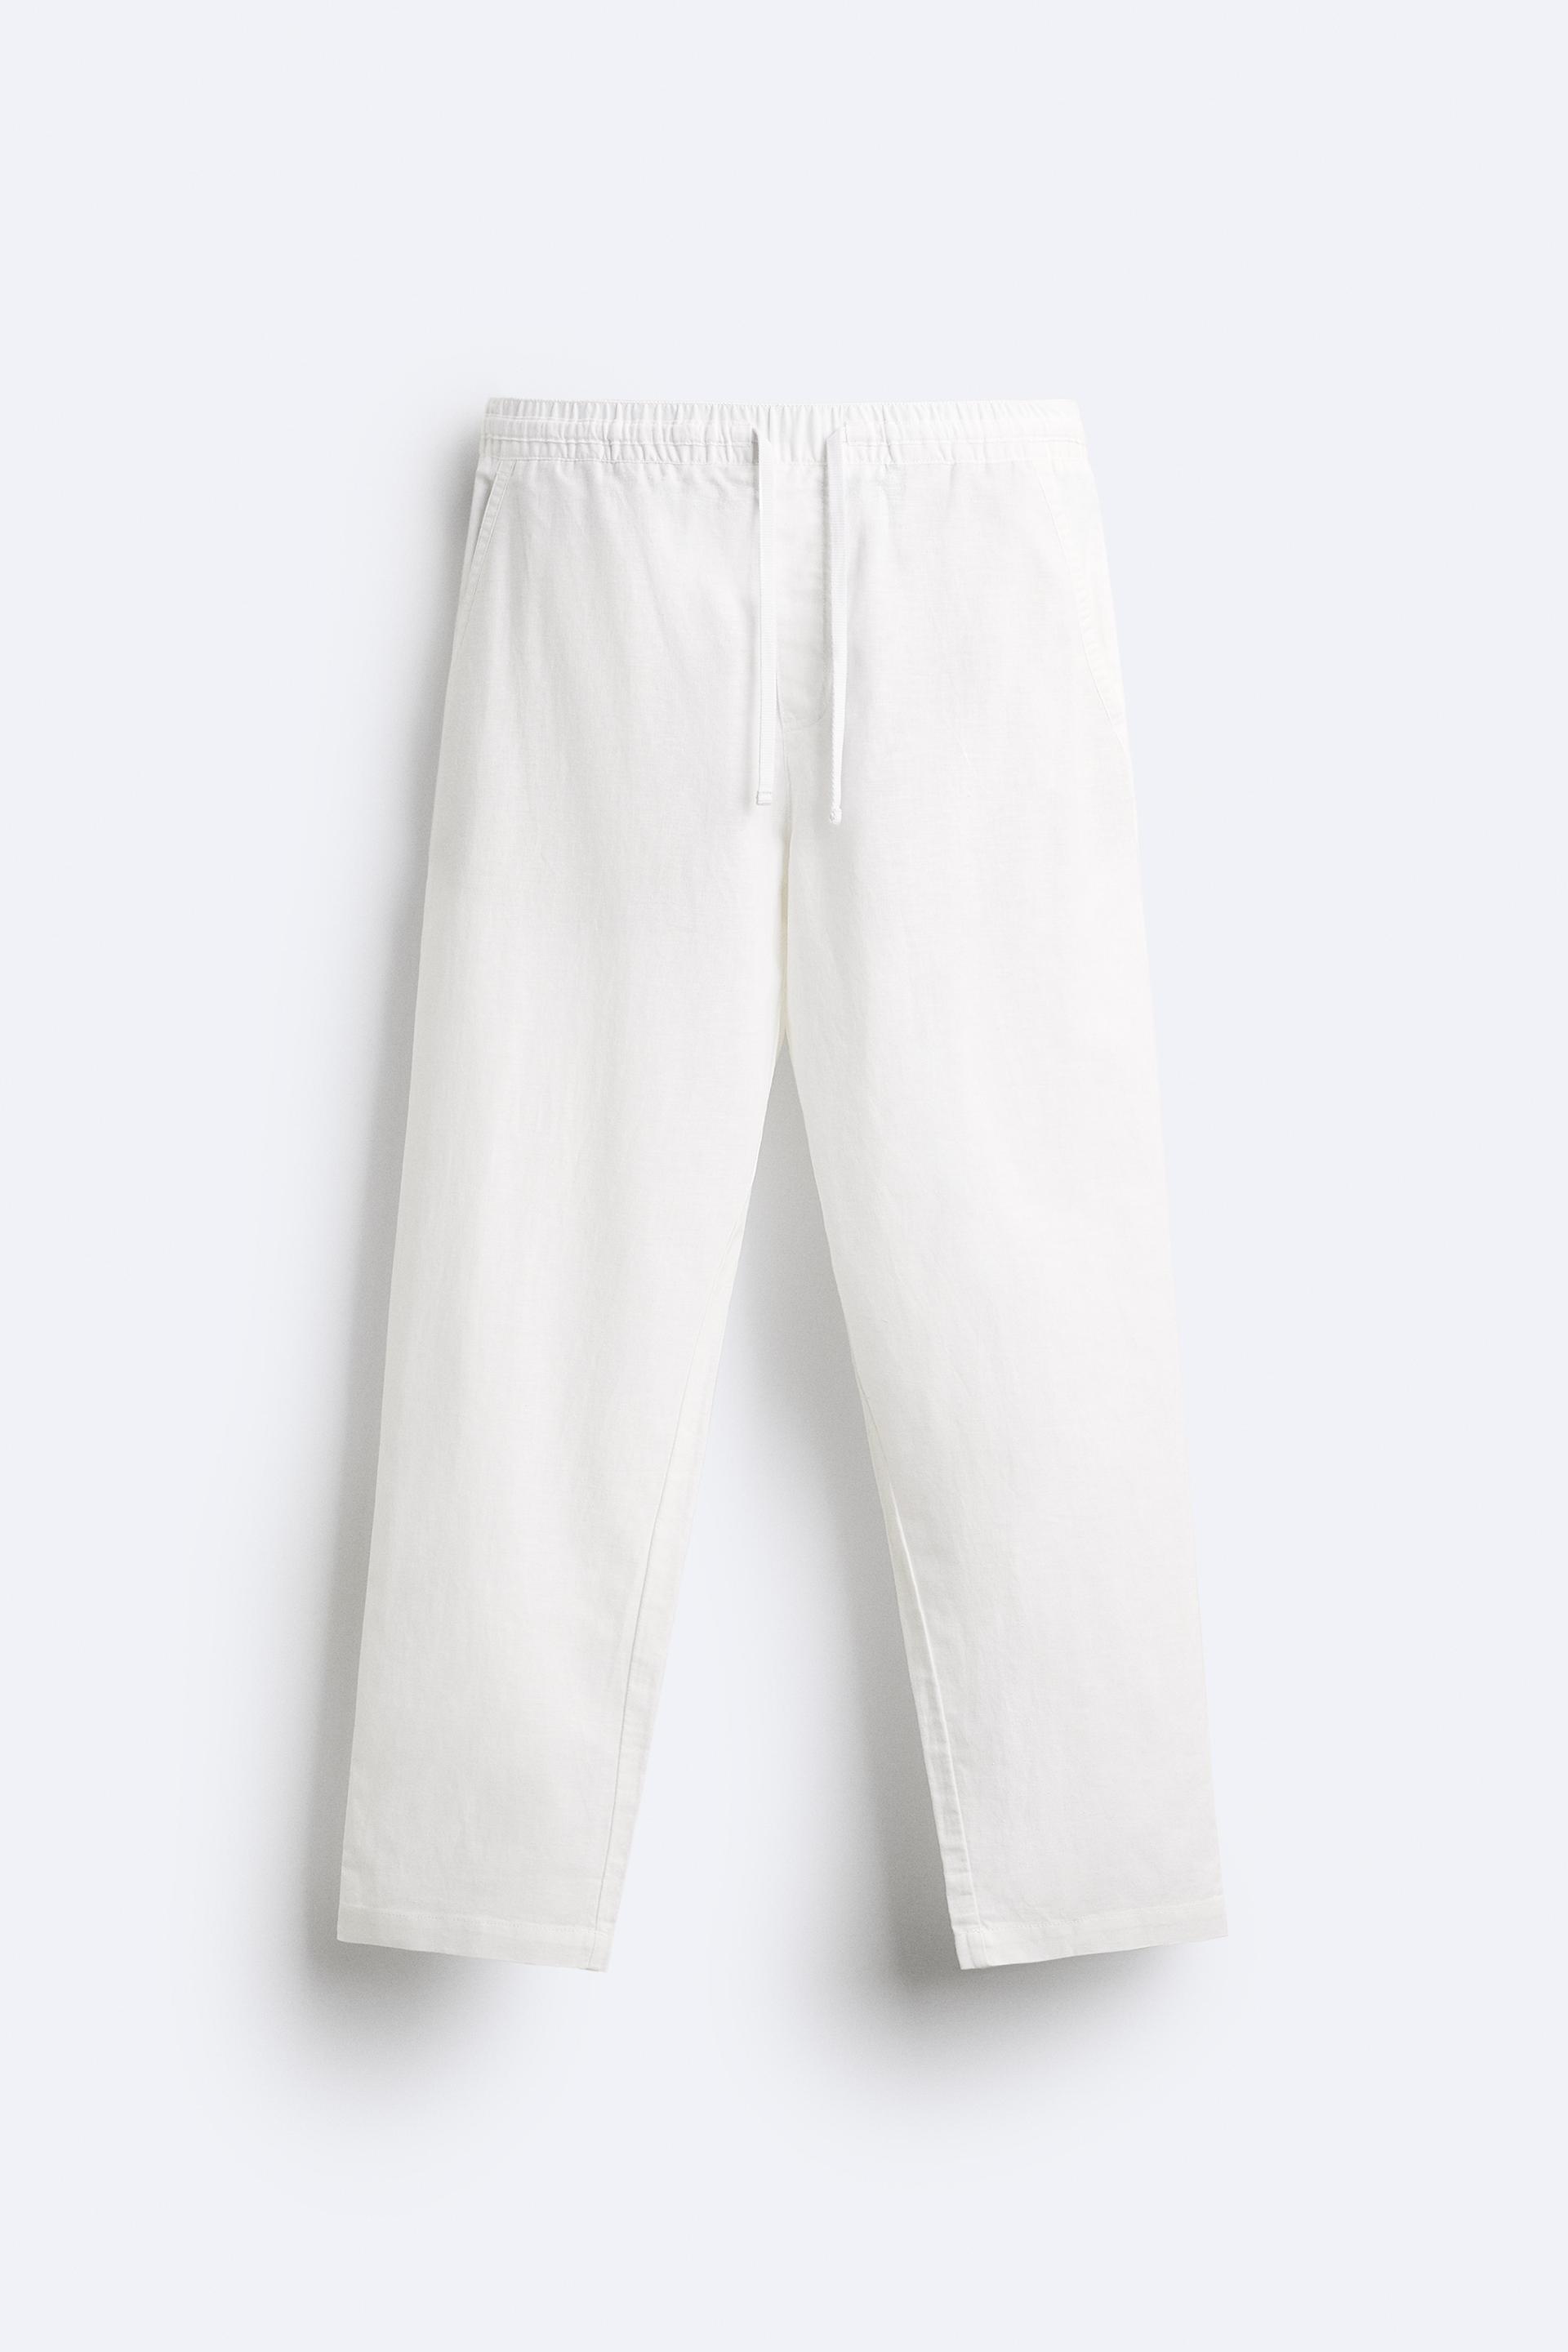 ZARA White Geometric Embroidered Linen Blend Pants Trousers Size